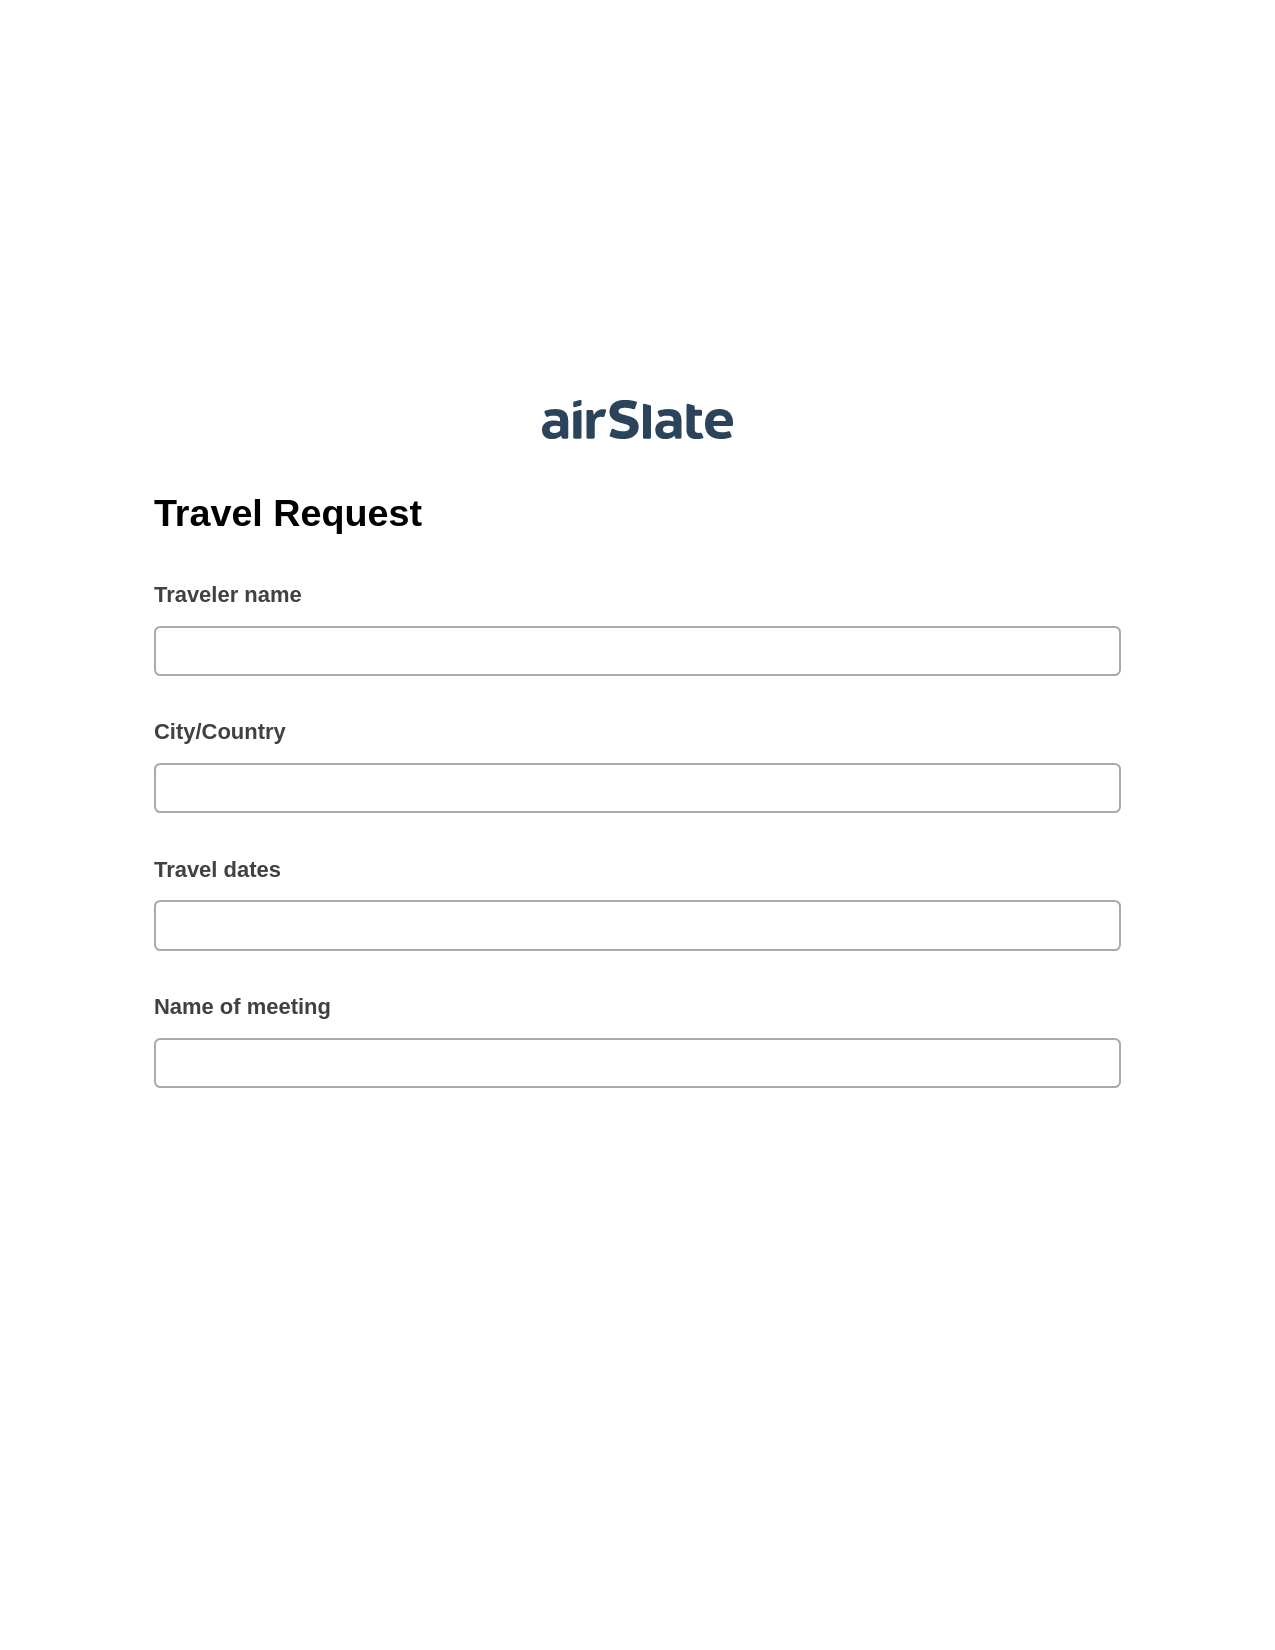 Travel Request Pre-fill Document Bot, Update NetSuite Records Bot, OneDrive Bot